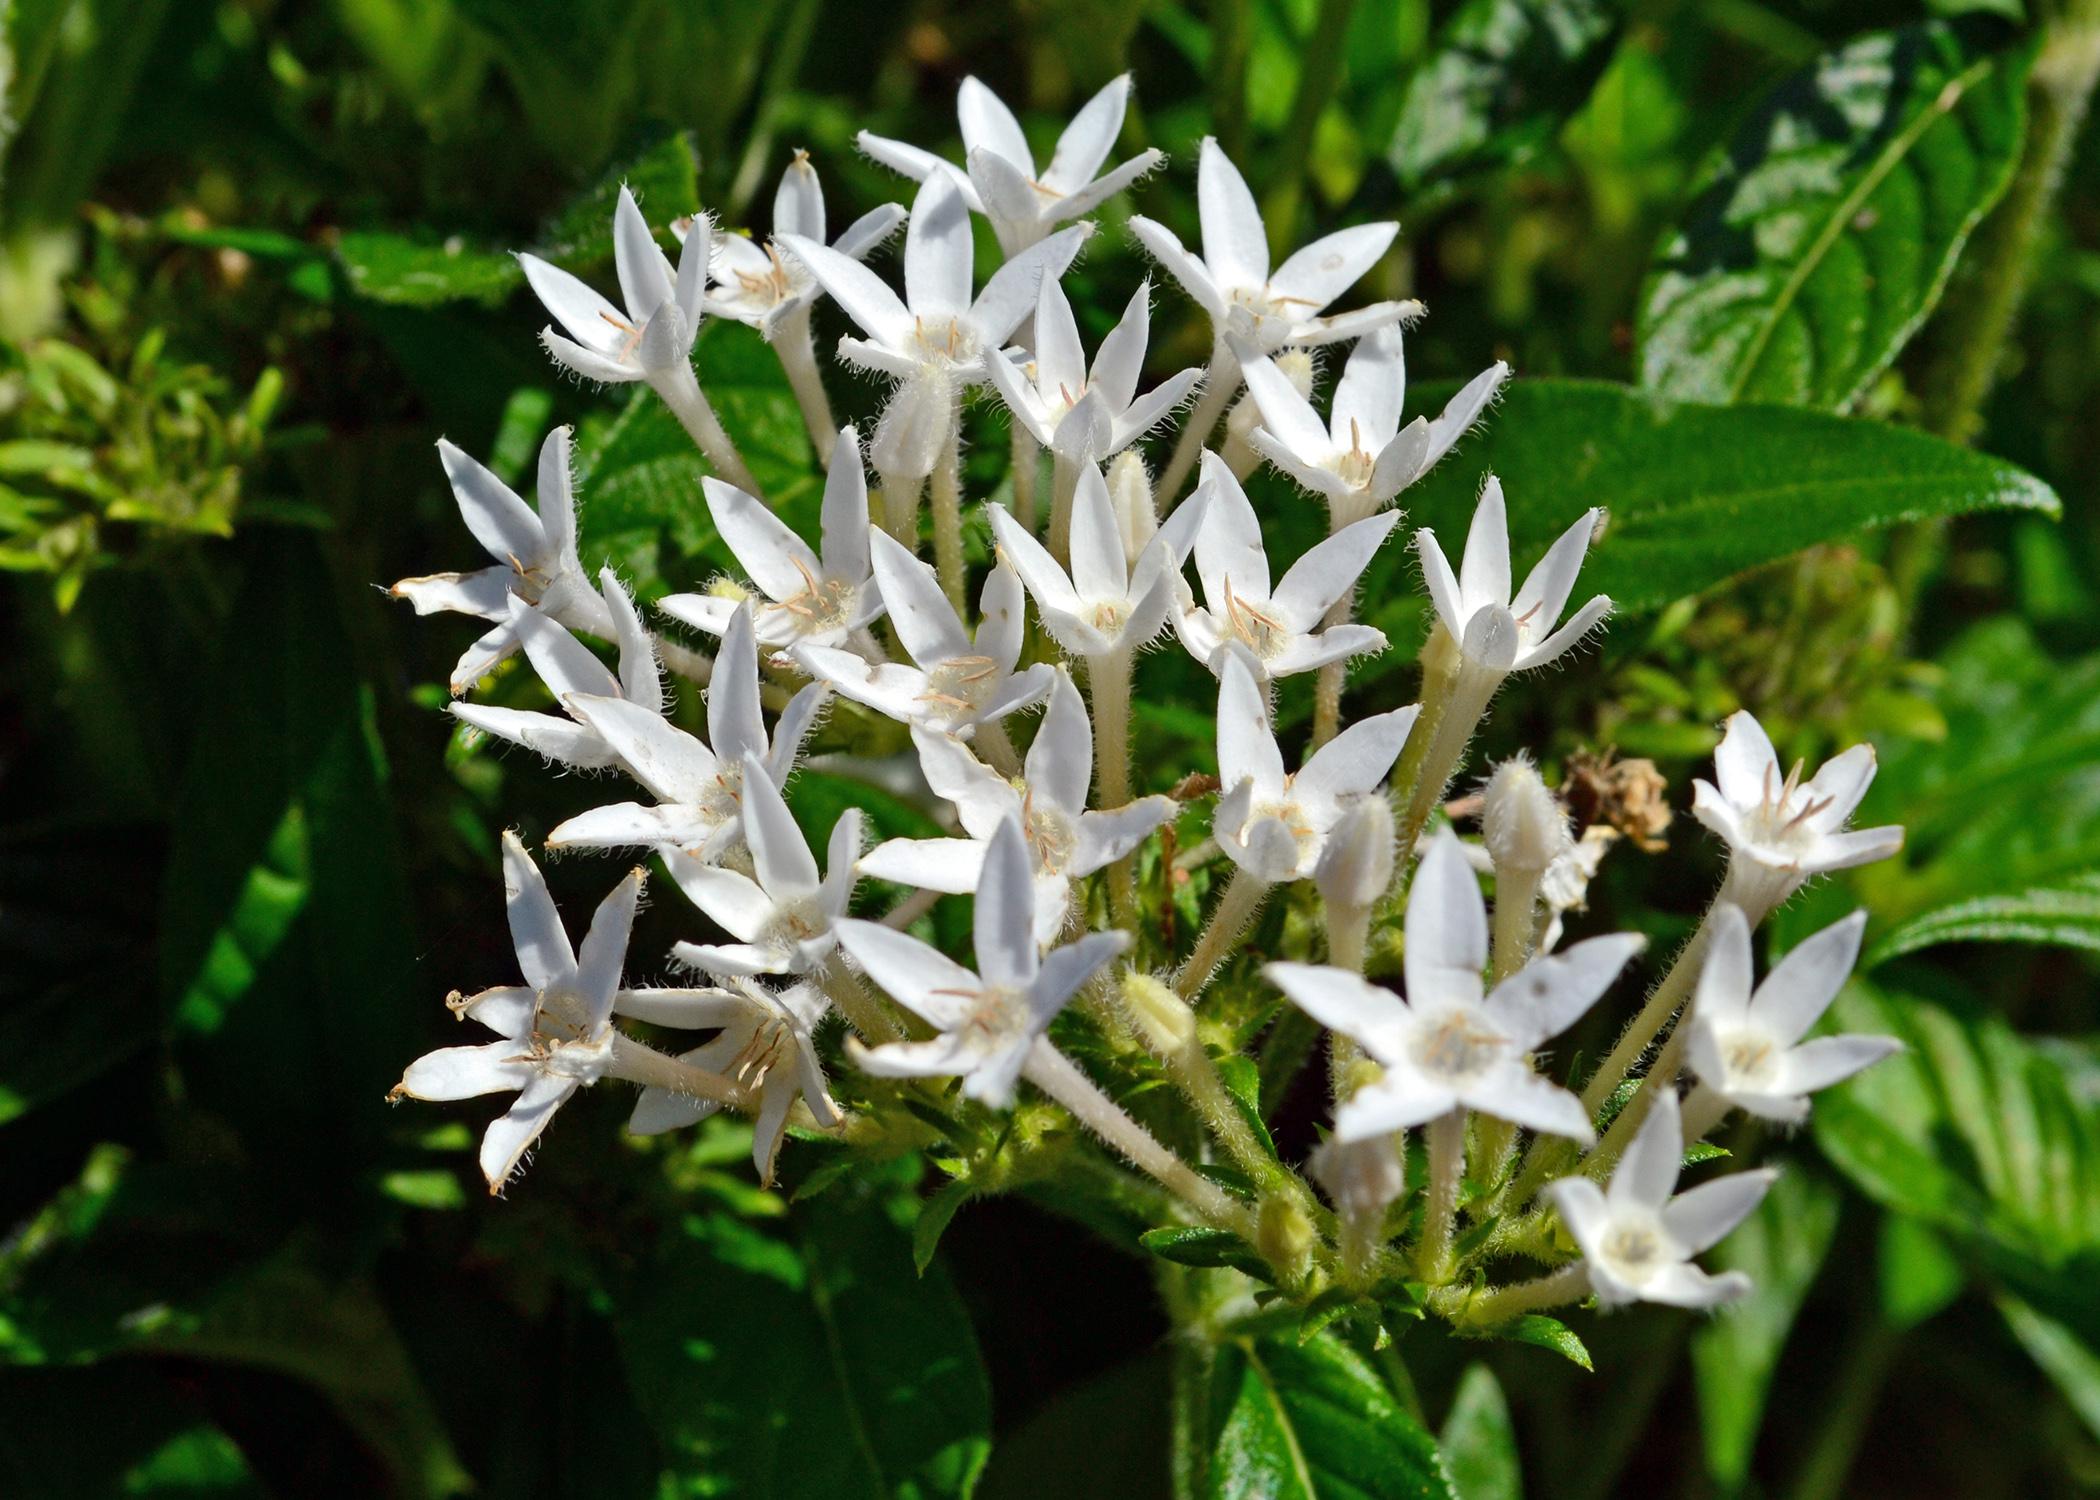 Small, white flowers bloom in a cluster.